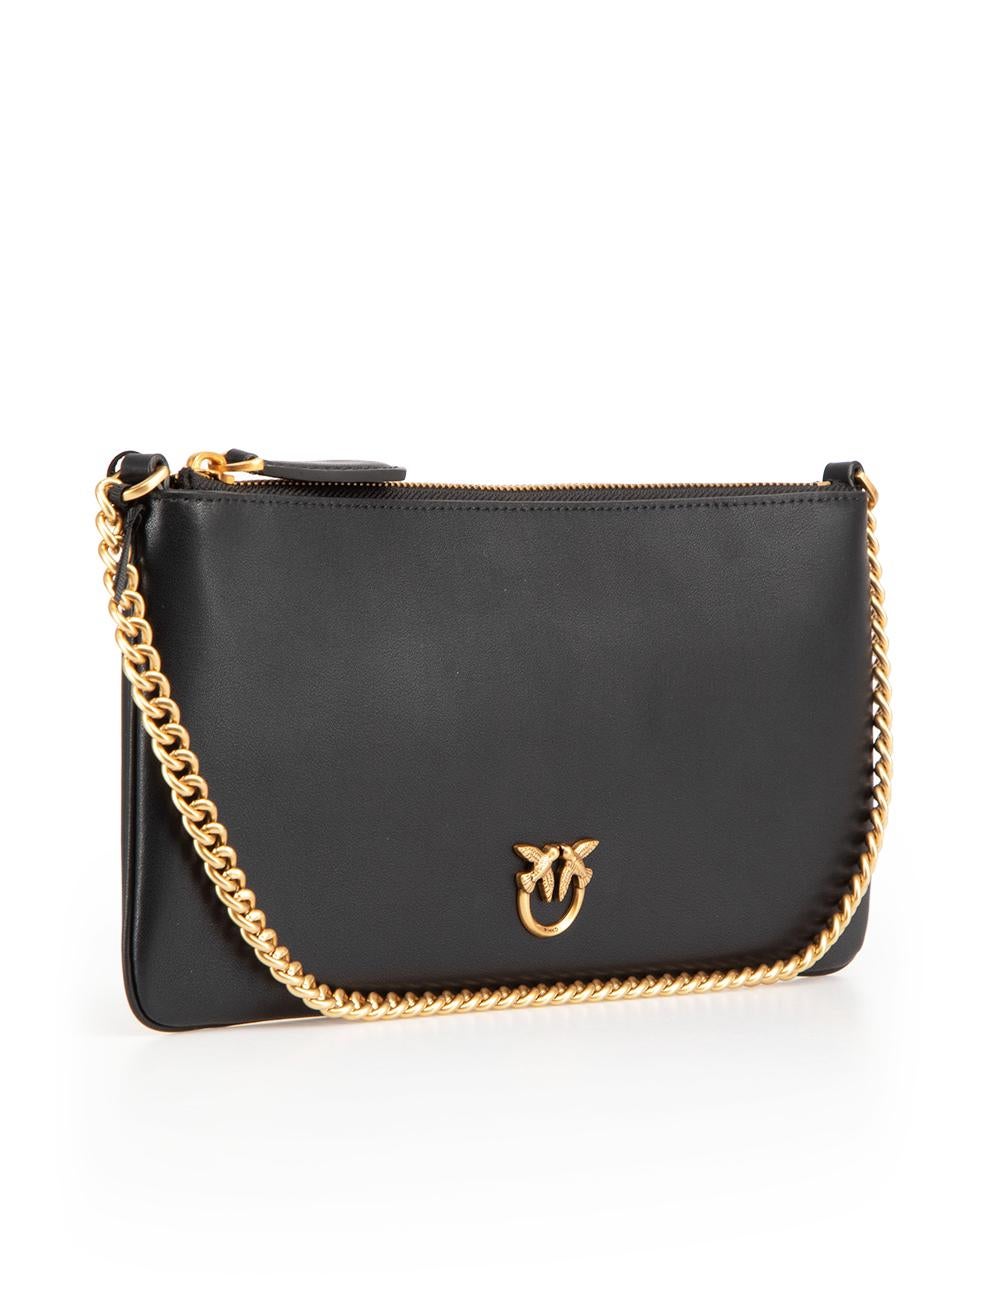 CONDITION is New with tags on this brand new Pinko designer item. This item comes with original packaging.
 
 
 
 Details
 
 
 SS24
 
 Horizontal Flat
 
 Black
 
 Mini shoulder bag
 
 Gold tone hardware
 
 Lovebirds logo detail
 
 Chain strap
 
 1x